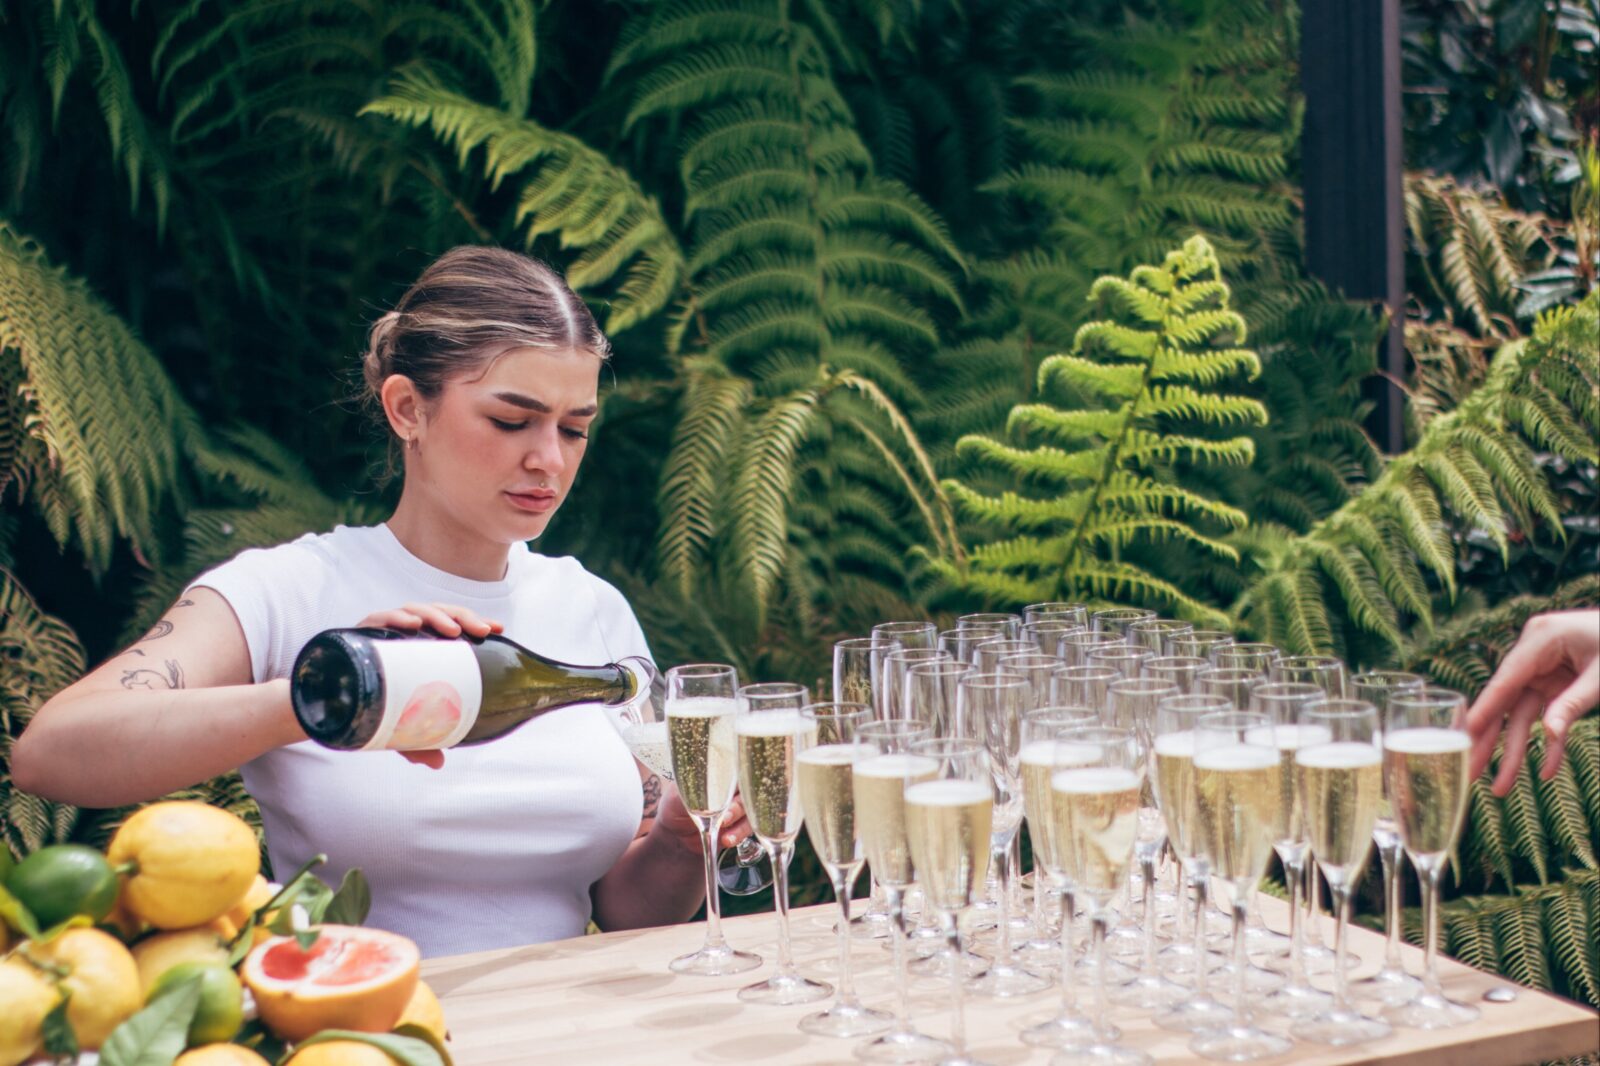 A caucasian woman in her twenties pours sparkling wine into champagne flutes